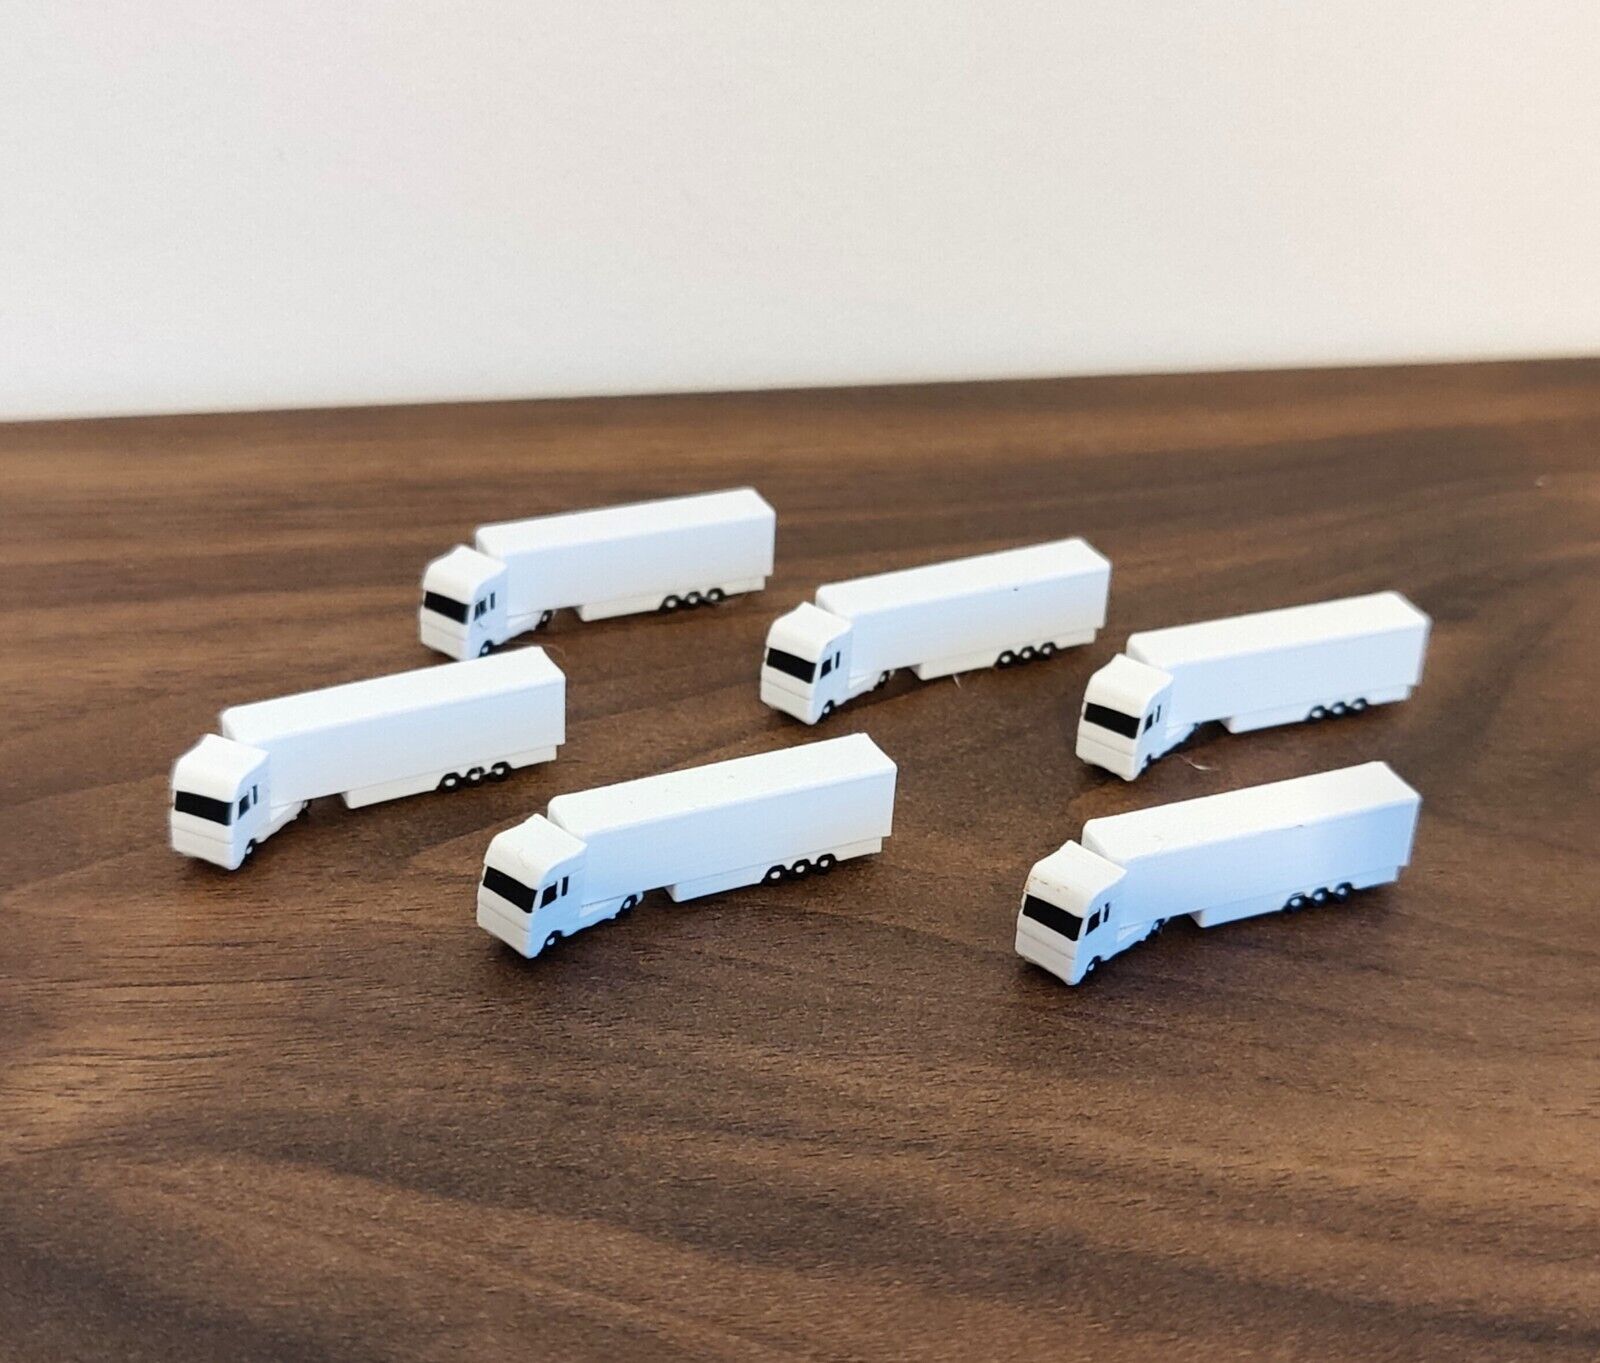 6x White ARTICULATED TRUCK/LORRY Airport GSE Vehicle 1:400 Scale FULLY ROTATING